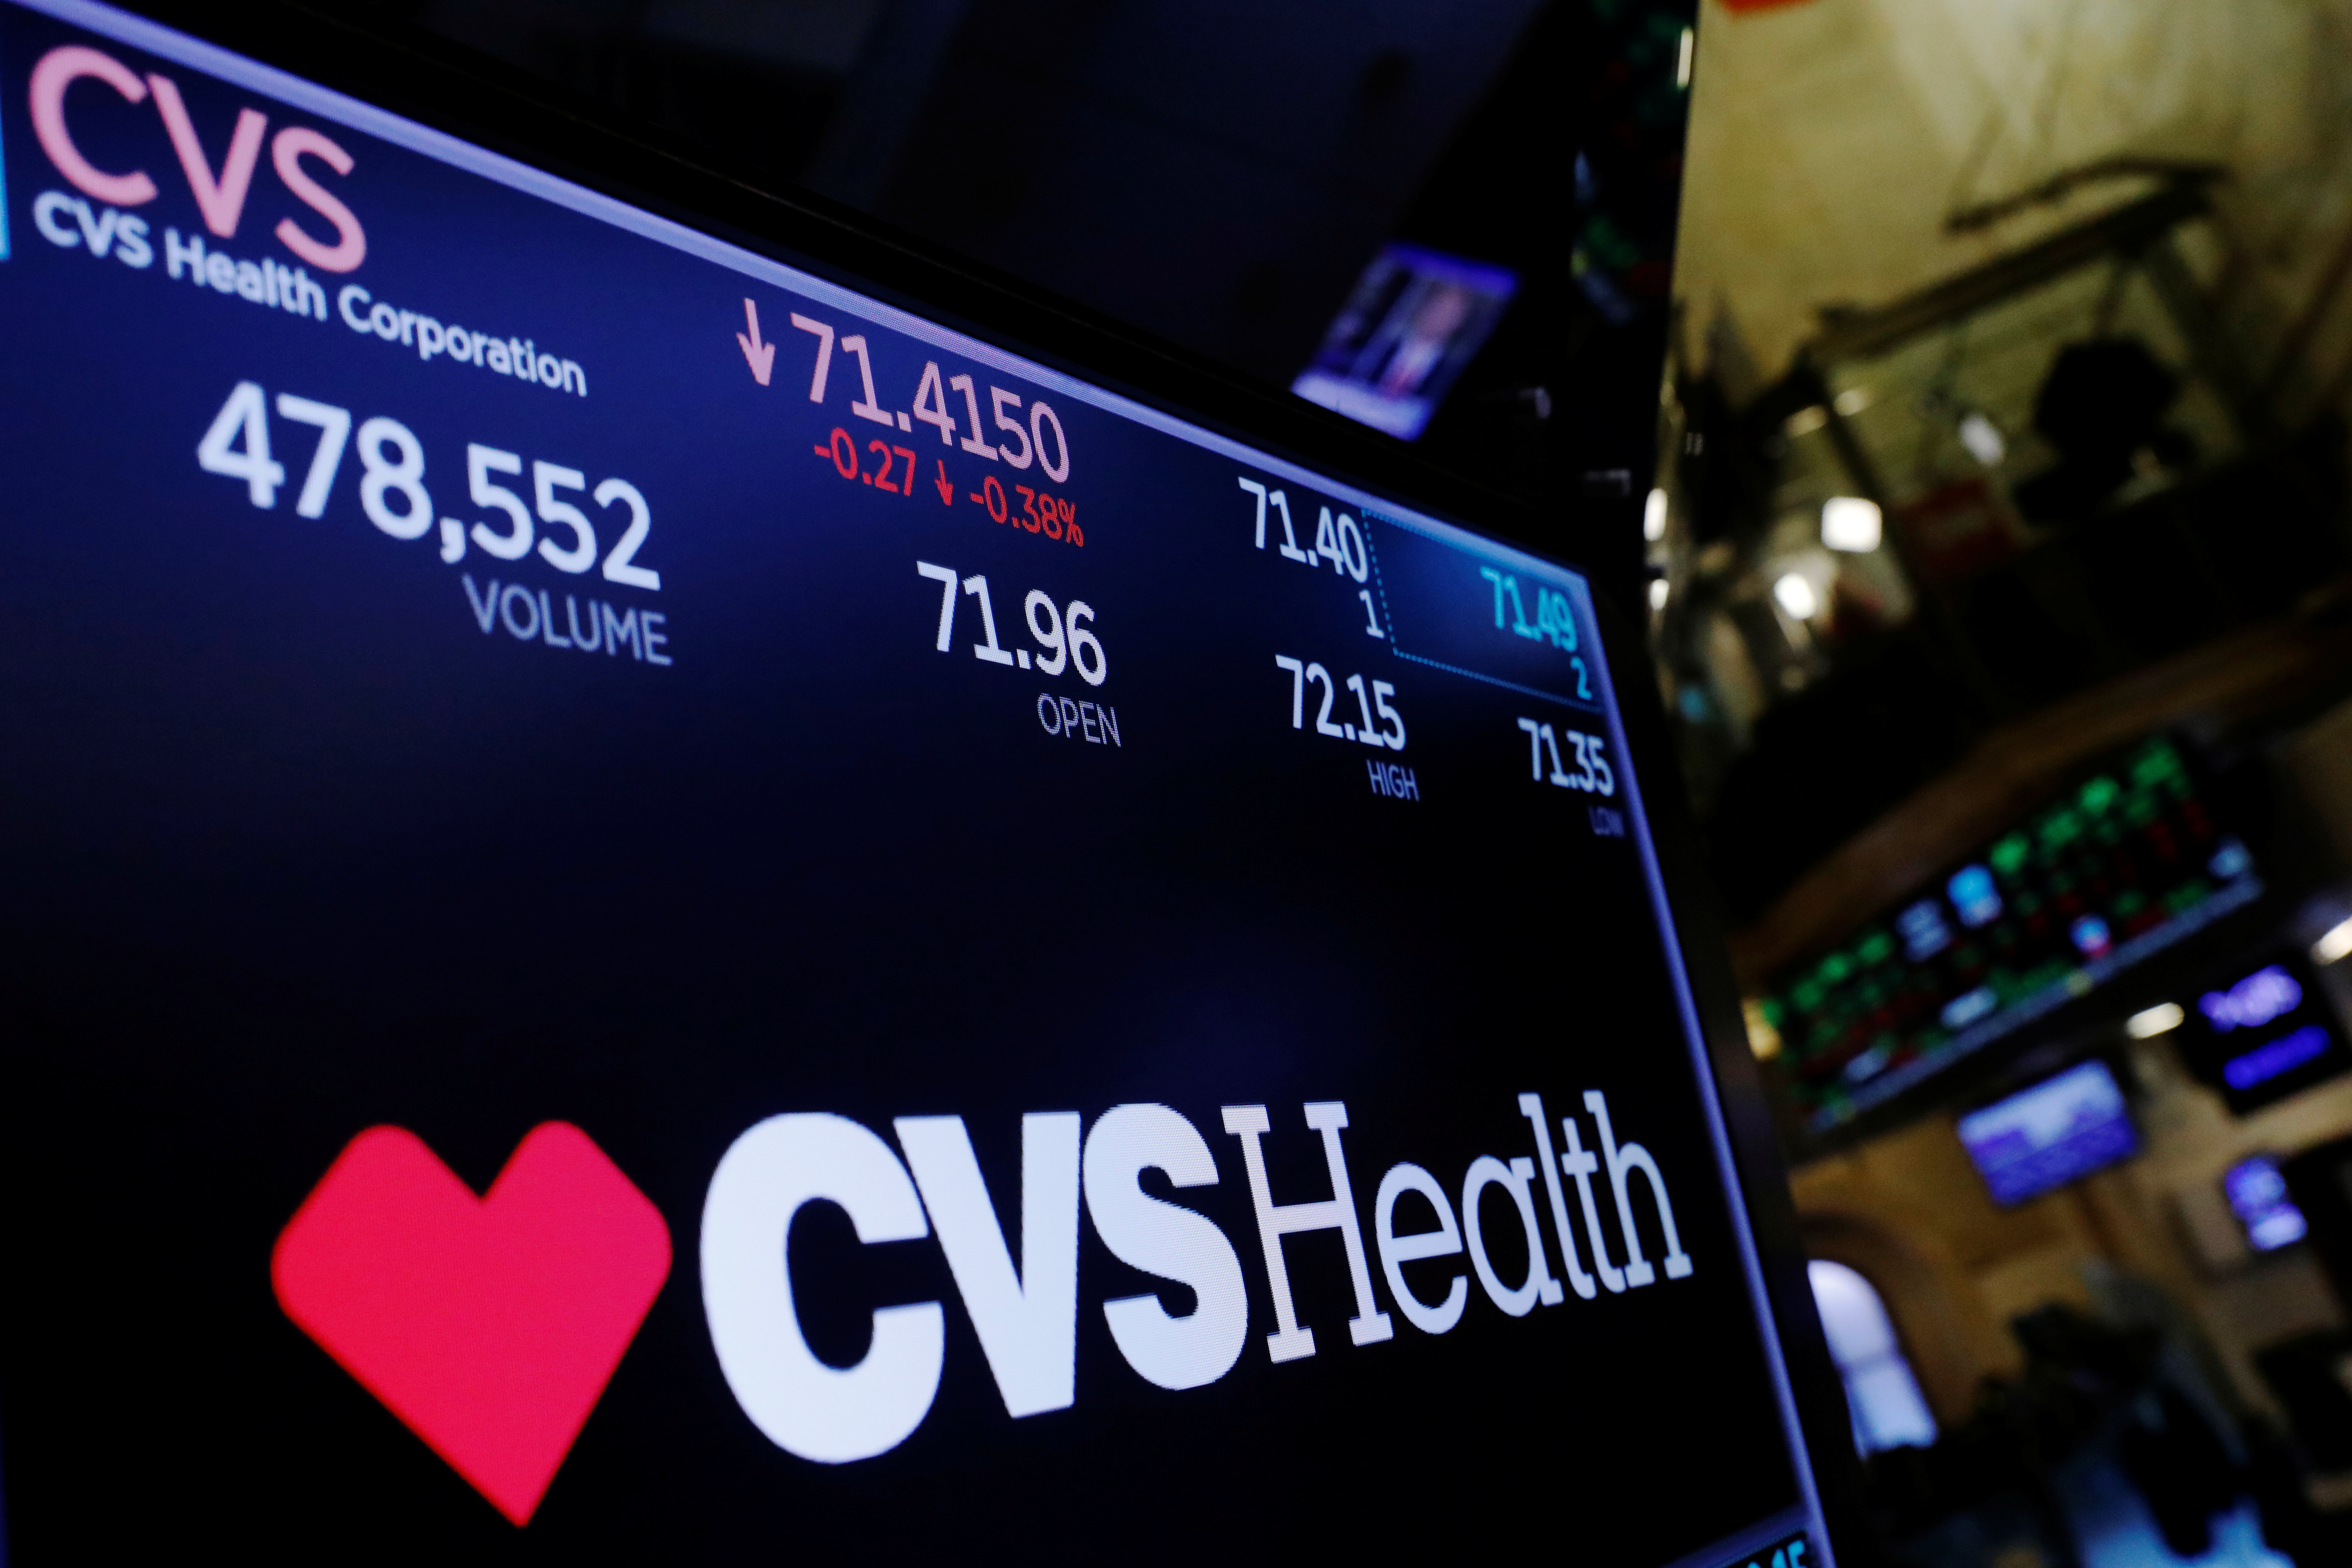 A logo of CVS Health is displayed on a monitor above the floor of the New York Stock Exchange shortly after the opening bell in New York